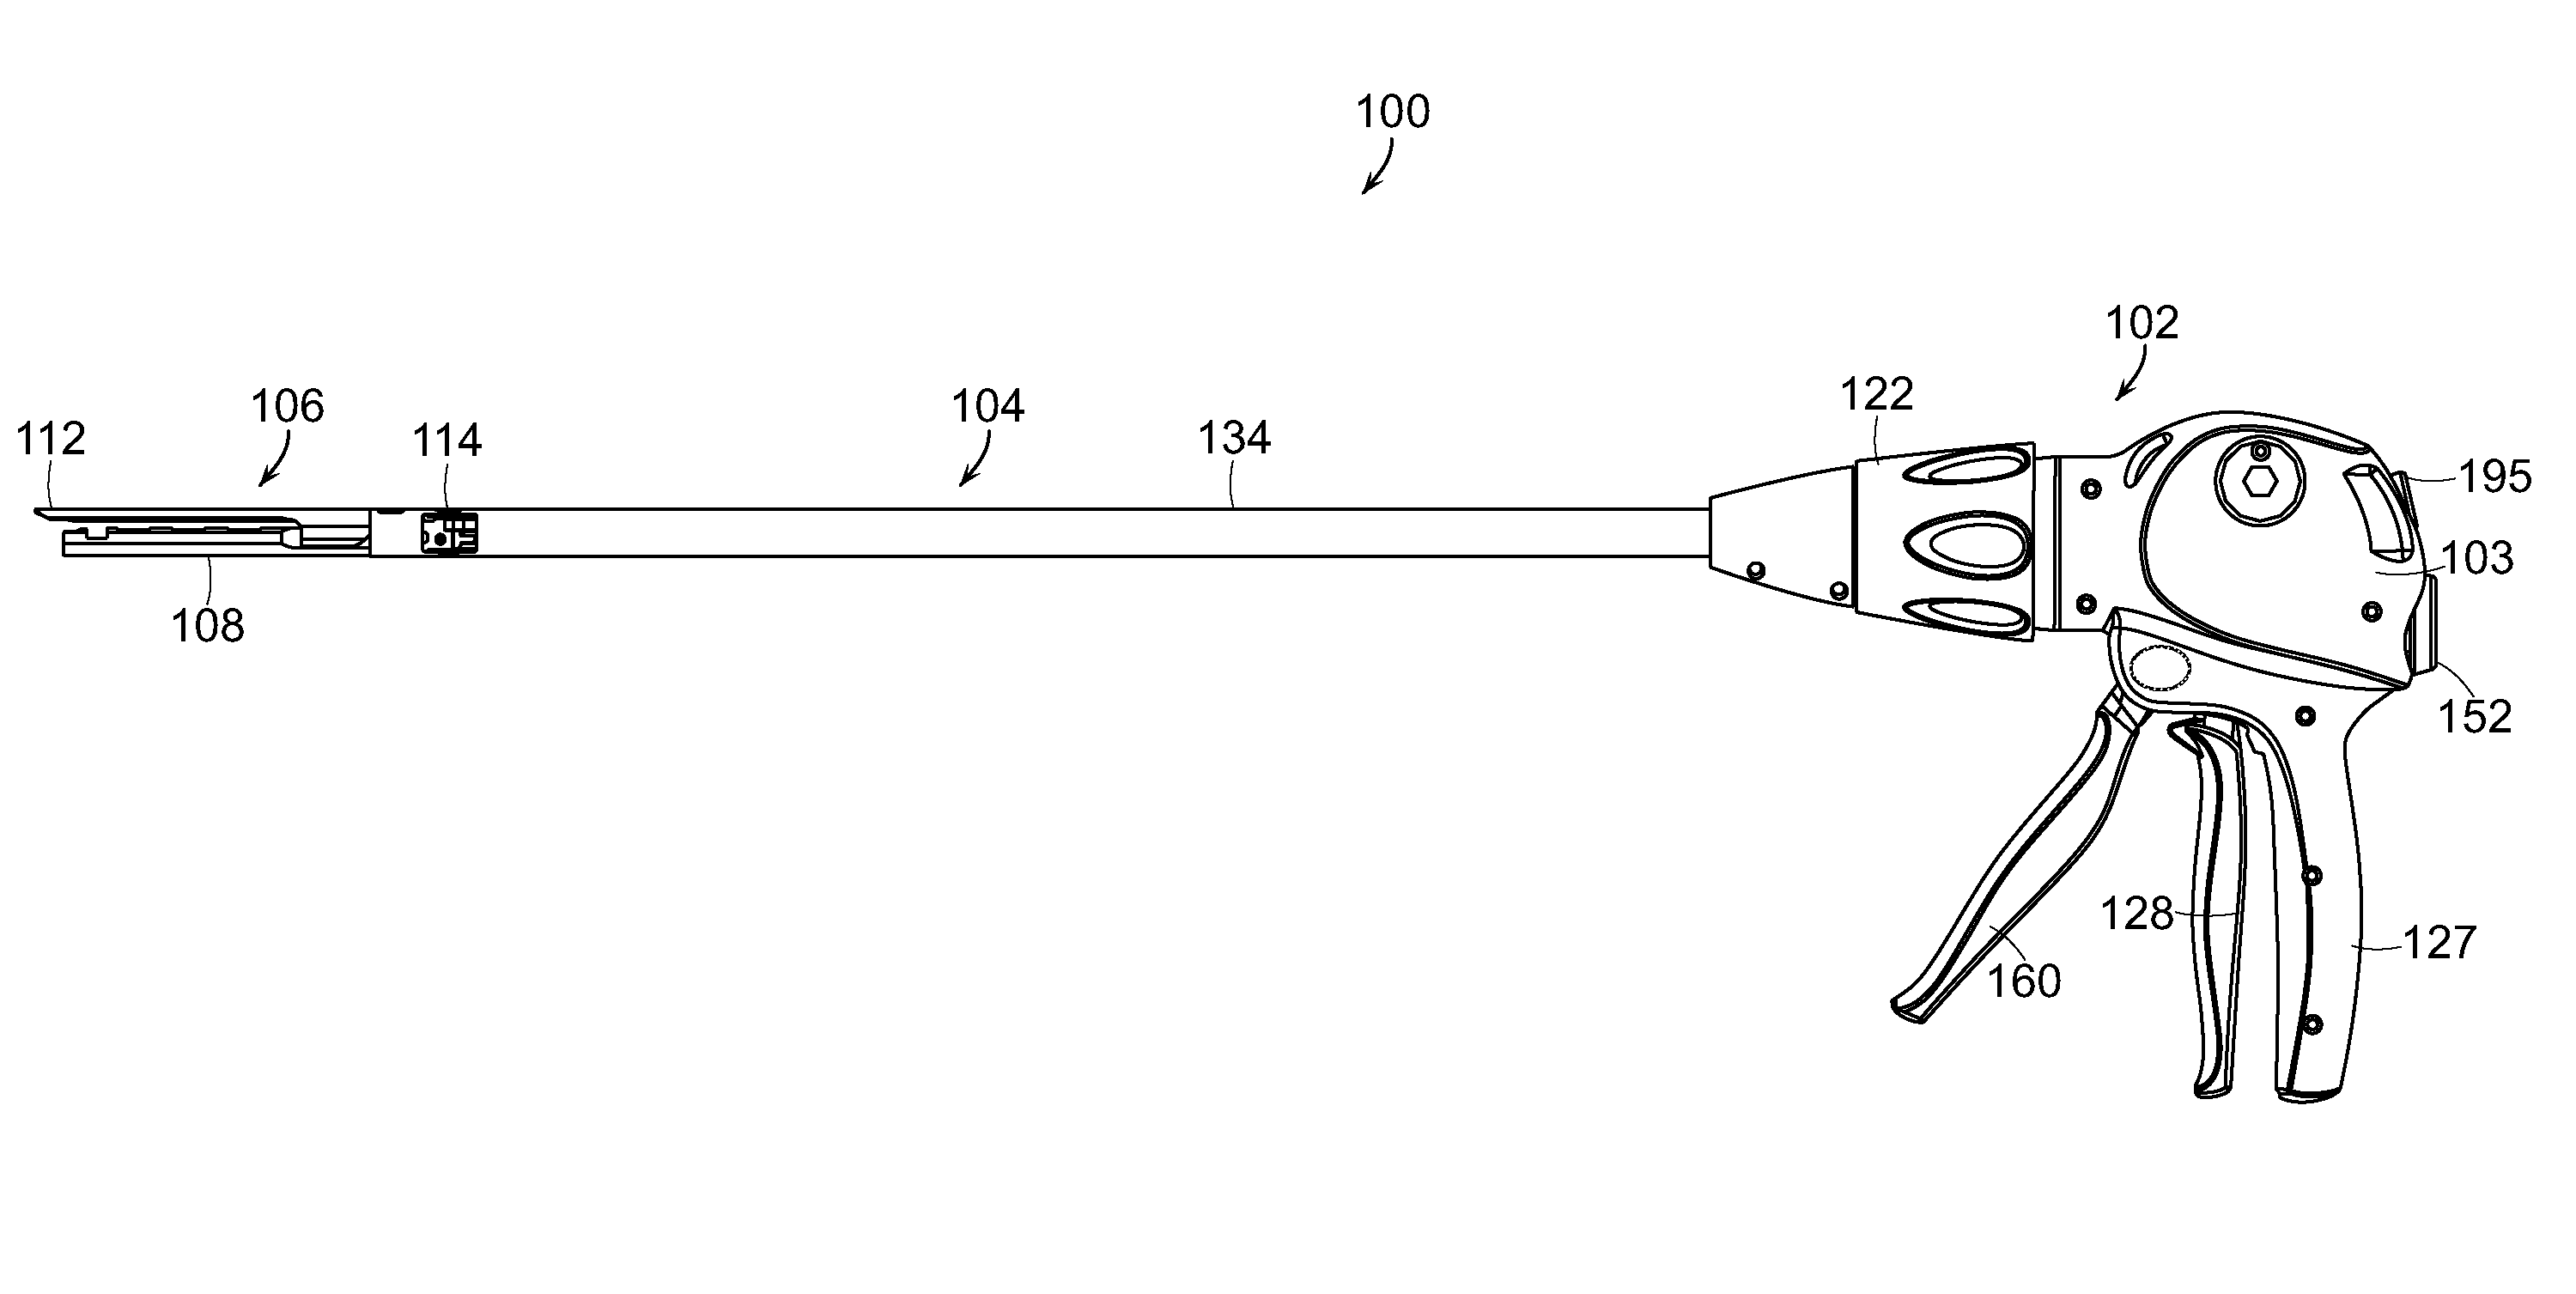 Surgical stapling instrument with an articulatable end effector